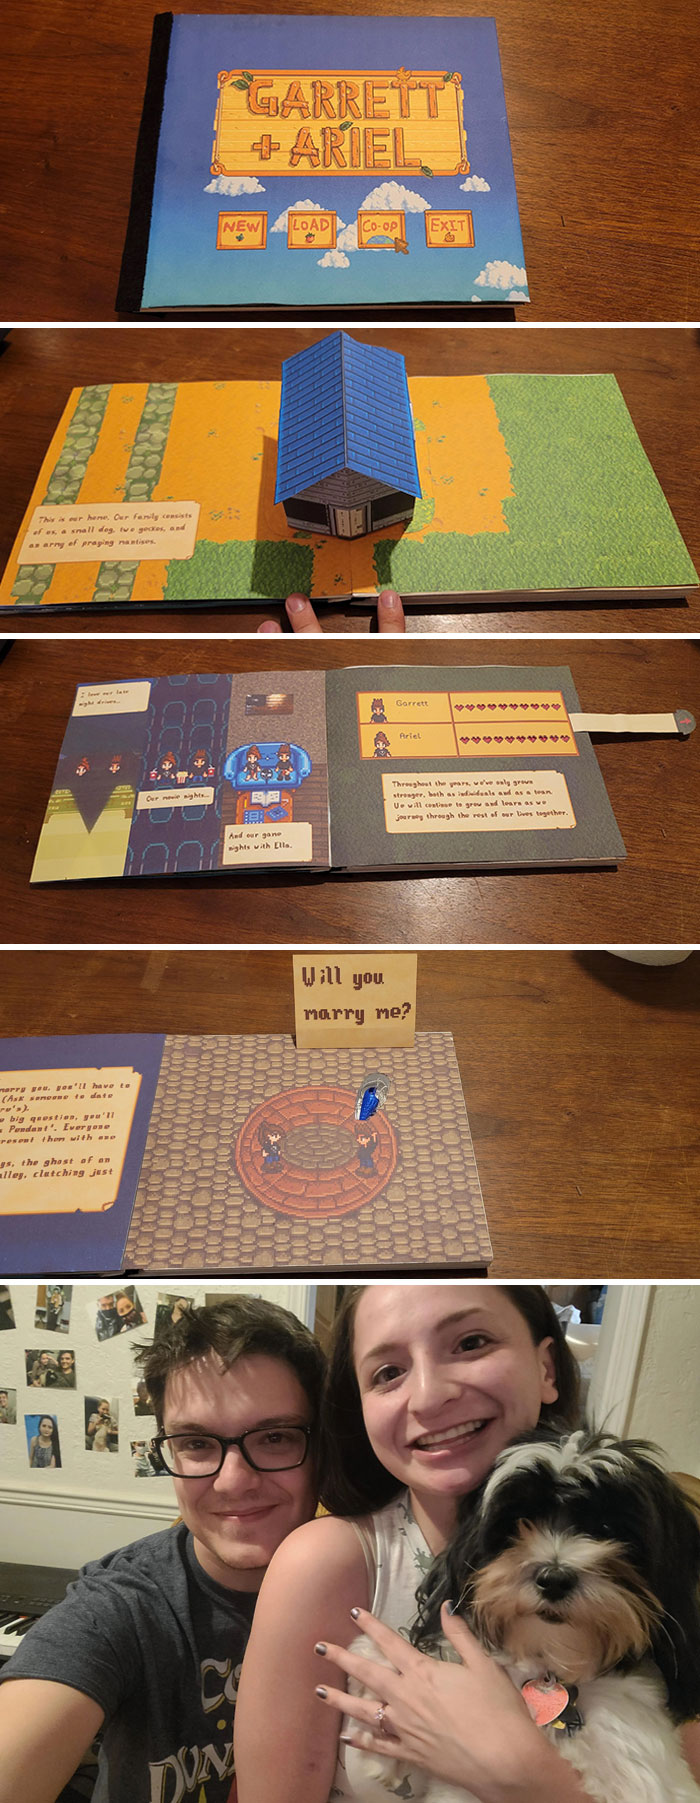 I Proposed To My Girlfriend On Our 5-Year Anniversary With A Stardew Valley Themed Pop-Up Book I Made. She Said Yes